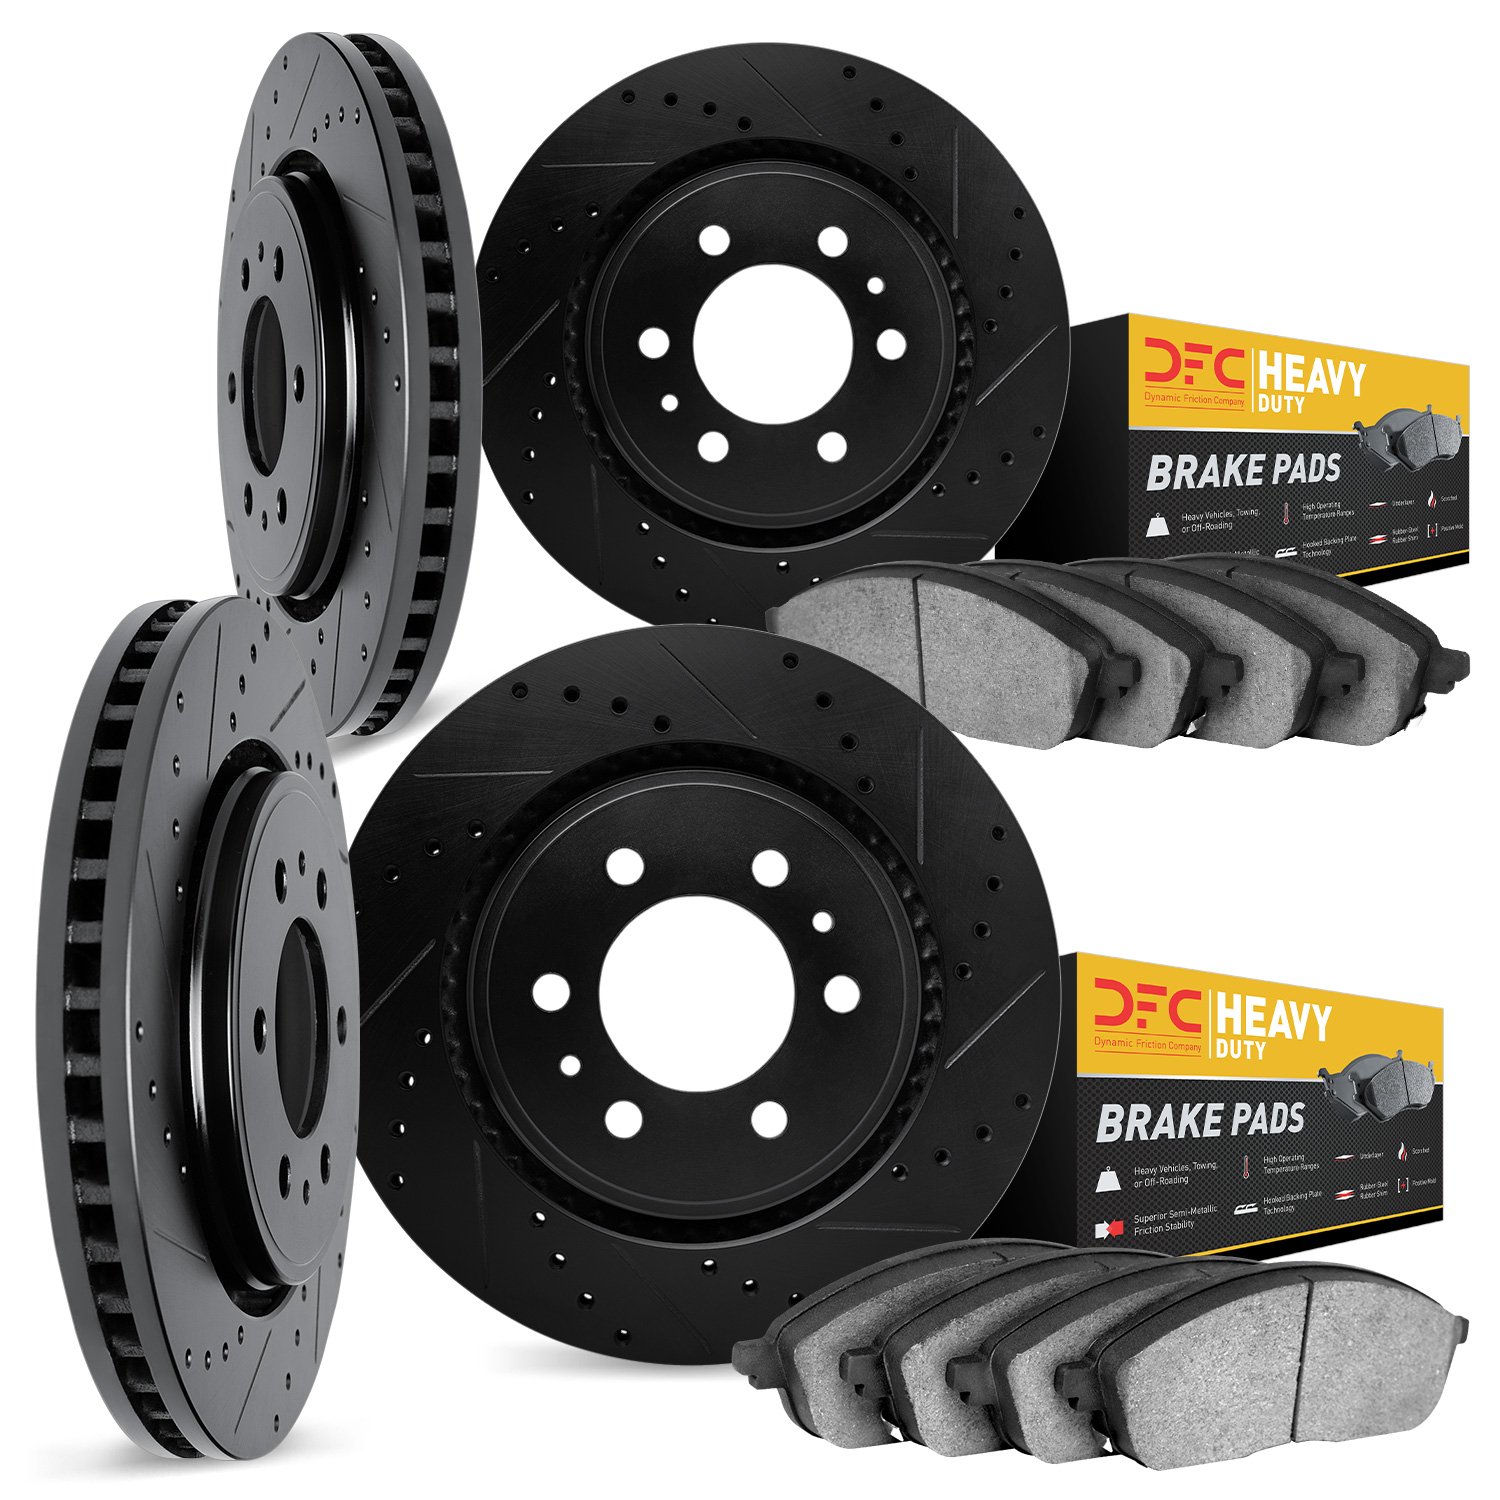 8204-40215 Drilled/Slotted Rotors w/Heavy-Duty Brake Pads Kit [Silver], Fits Select Multiple Makes/Models, Position: Front and R